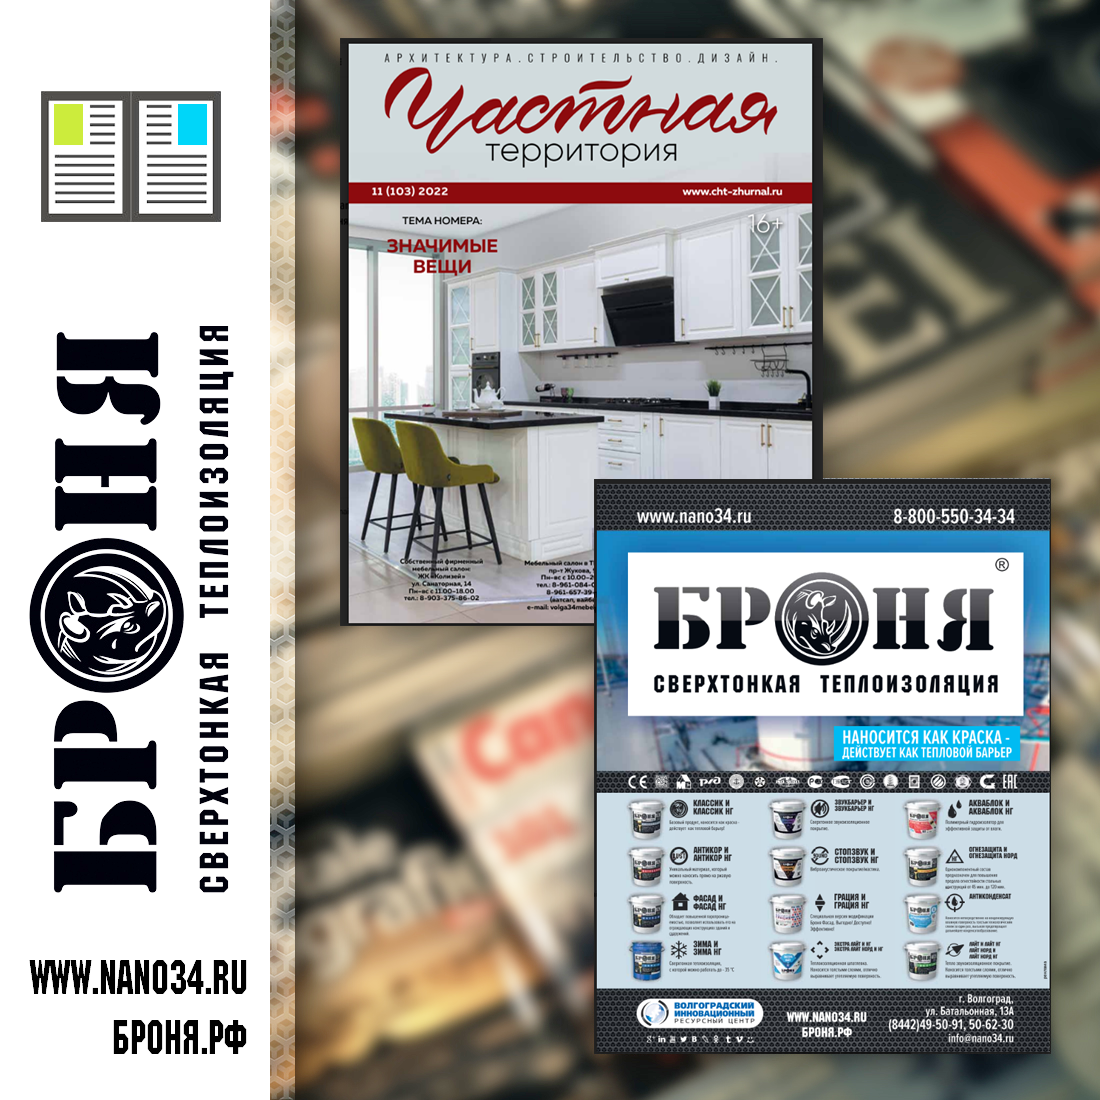 Thermal insulation BRONYA in the new issue of the magazine "Private territory" 11 (103) 2022 // "Important things". (photo)